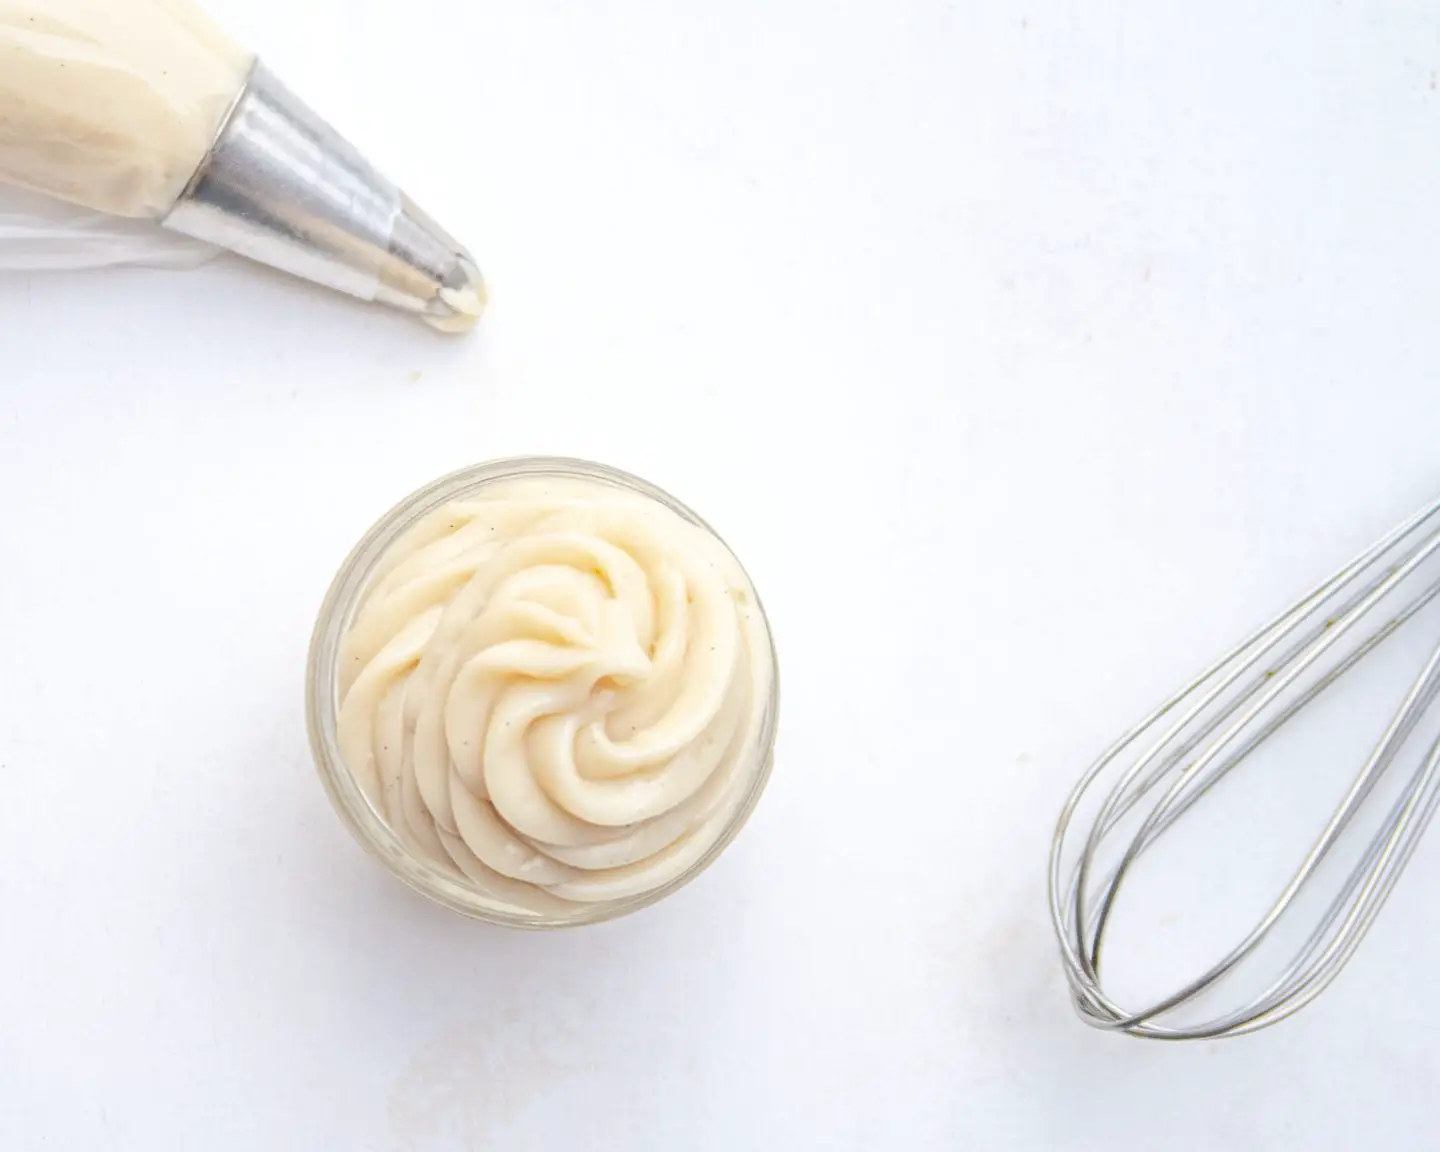 Top view of vegan pastry cream in a jar with a whisk and pastry bag